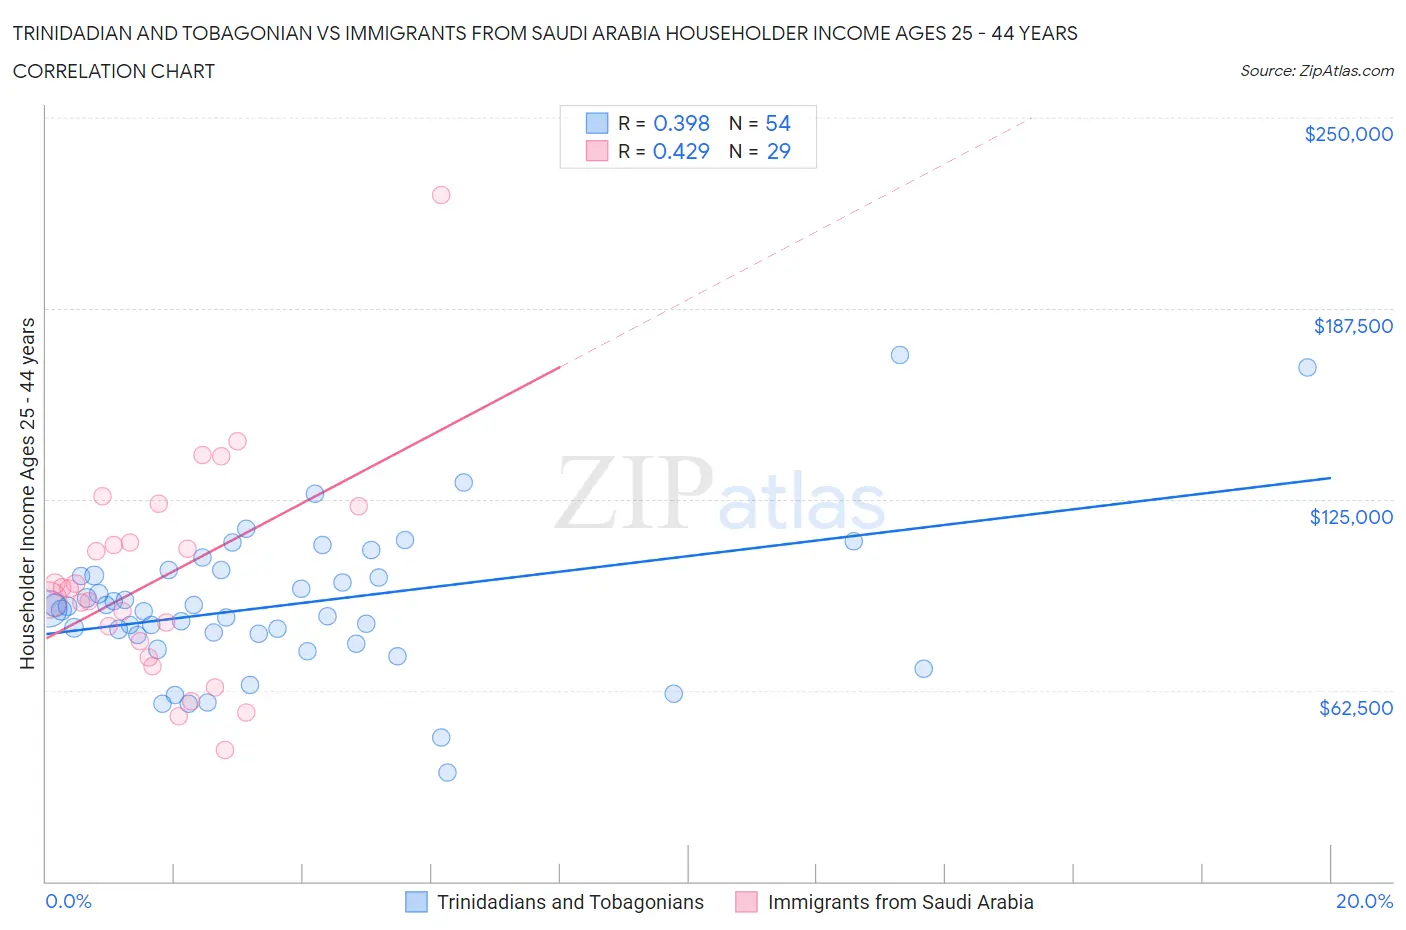 Trinidadian and Tobagonian vs Immigrants from Saudi Arabia Householder Income Ages 25 - 44 years